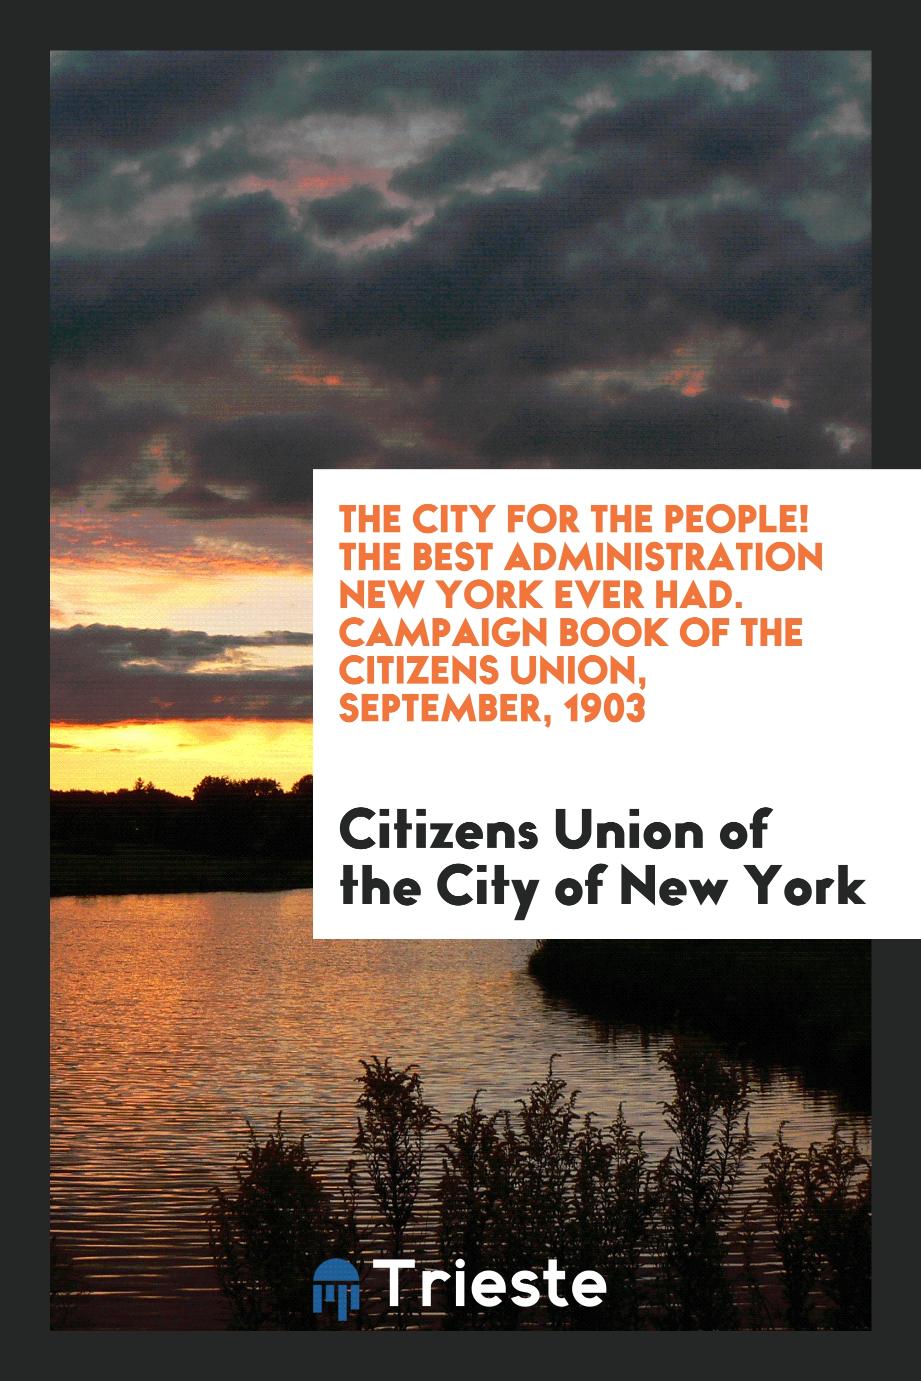 The City for the People! The Best Administration New York Ever Had. Campaign Book of the Citizens Union, September, 1903